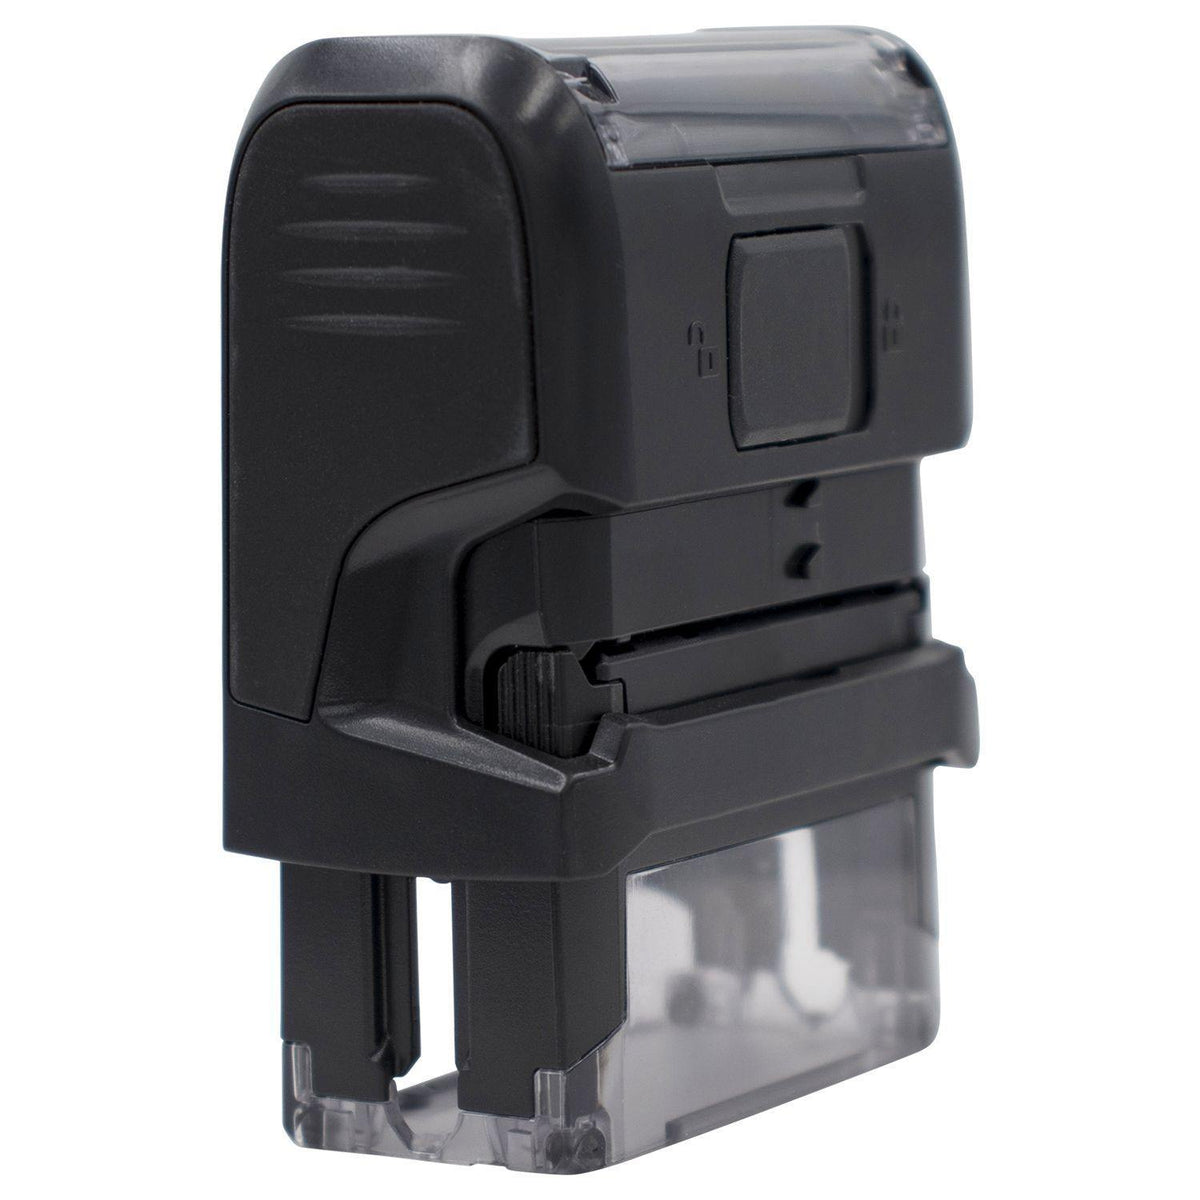 Self Inking Confidential Stamp - Engineer Seal Stamps - Brand_Trodat, Impression Size_Small, Stamp Type_Self-Inking Stamp, Type of Use_Legal, Type of Use_Office, Type of Use_Postal &amp; Mailing, Type of Use_Shipping &amp; Receiving